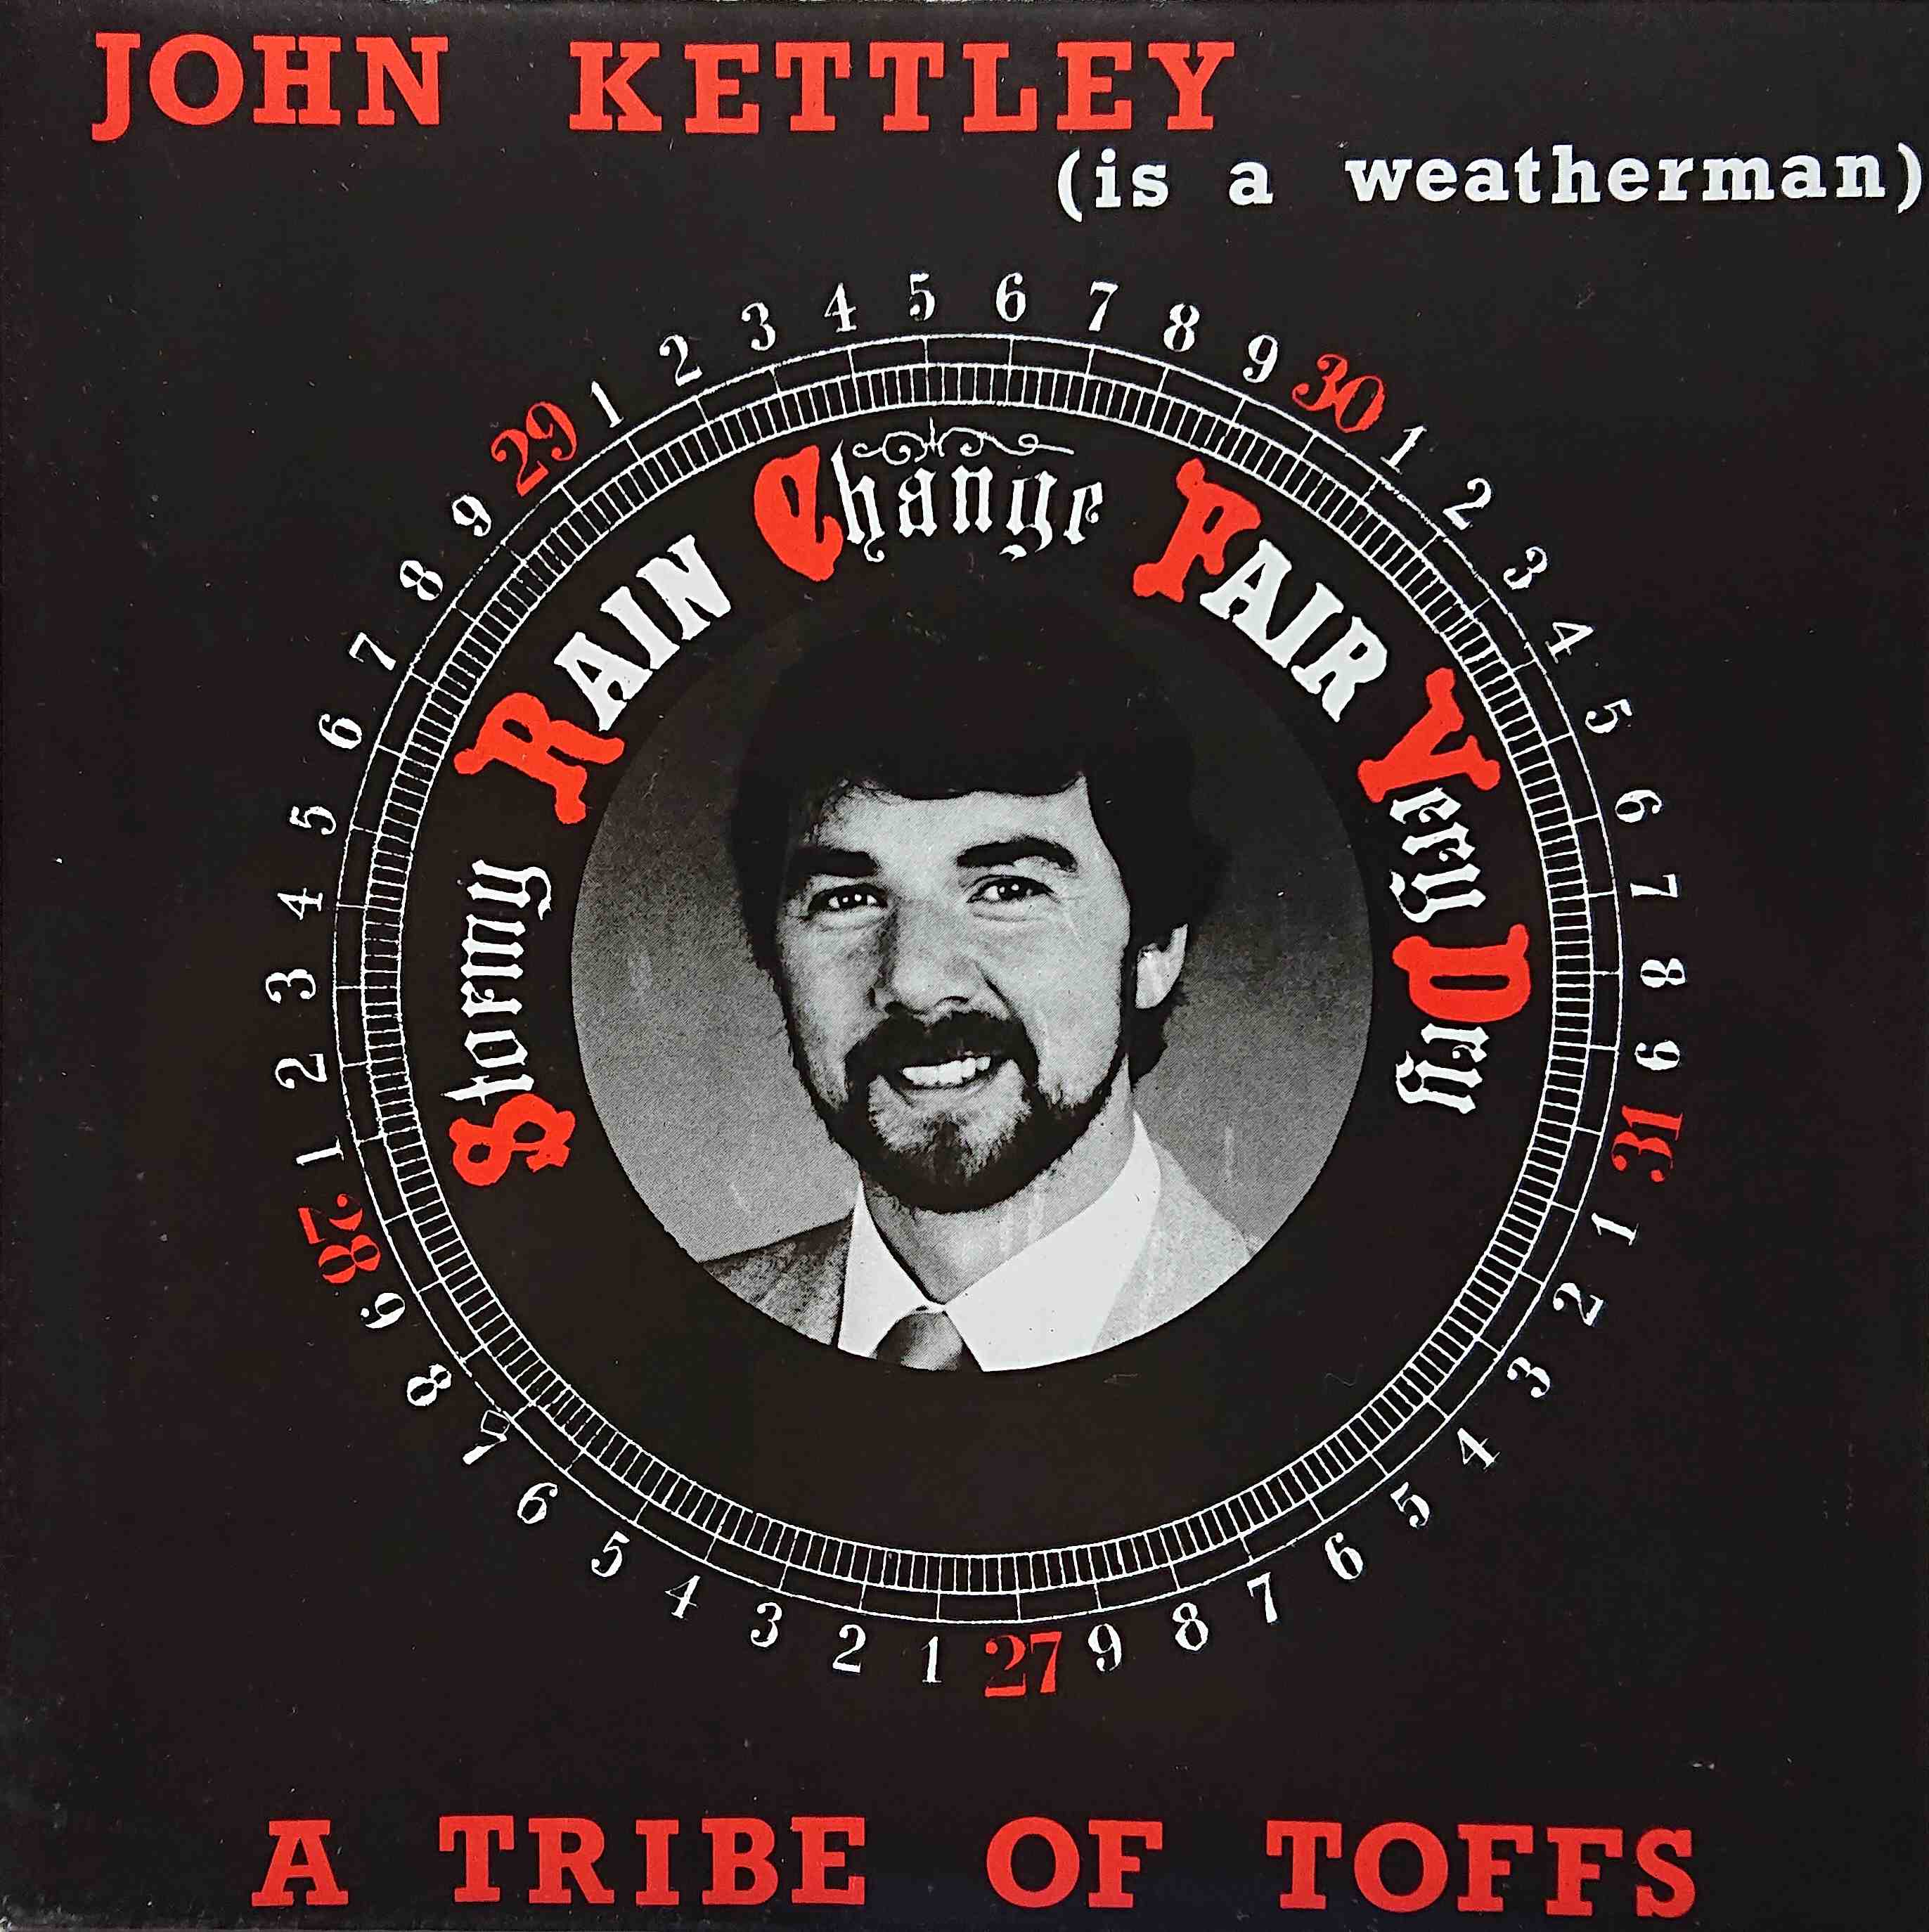 Picture of John Kettley (Is a weather man) by artist A tribe of toft 